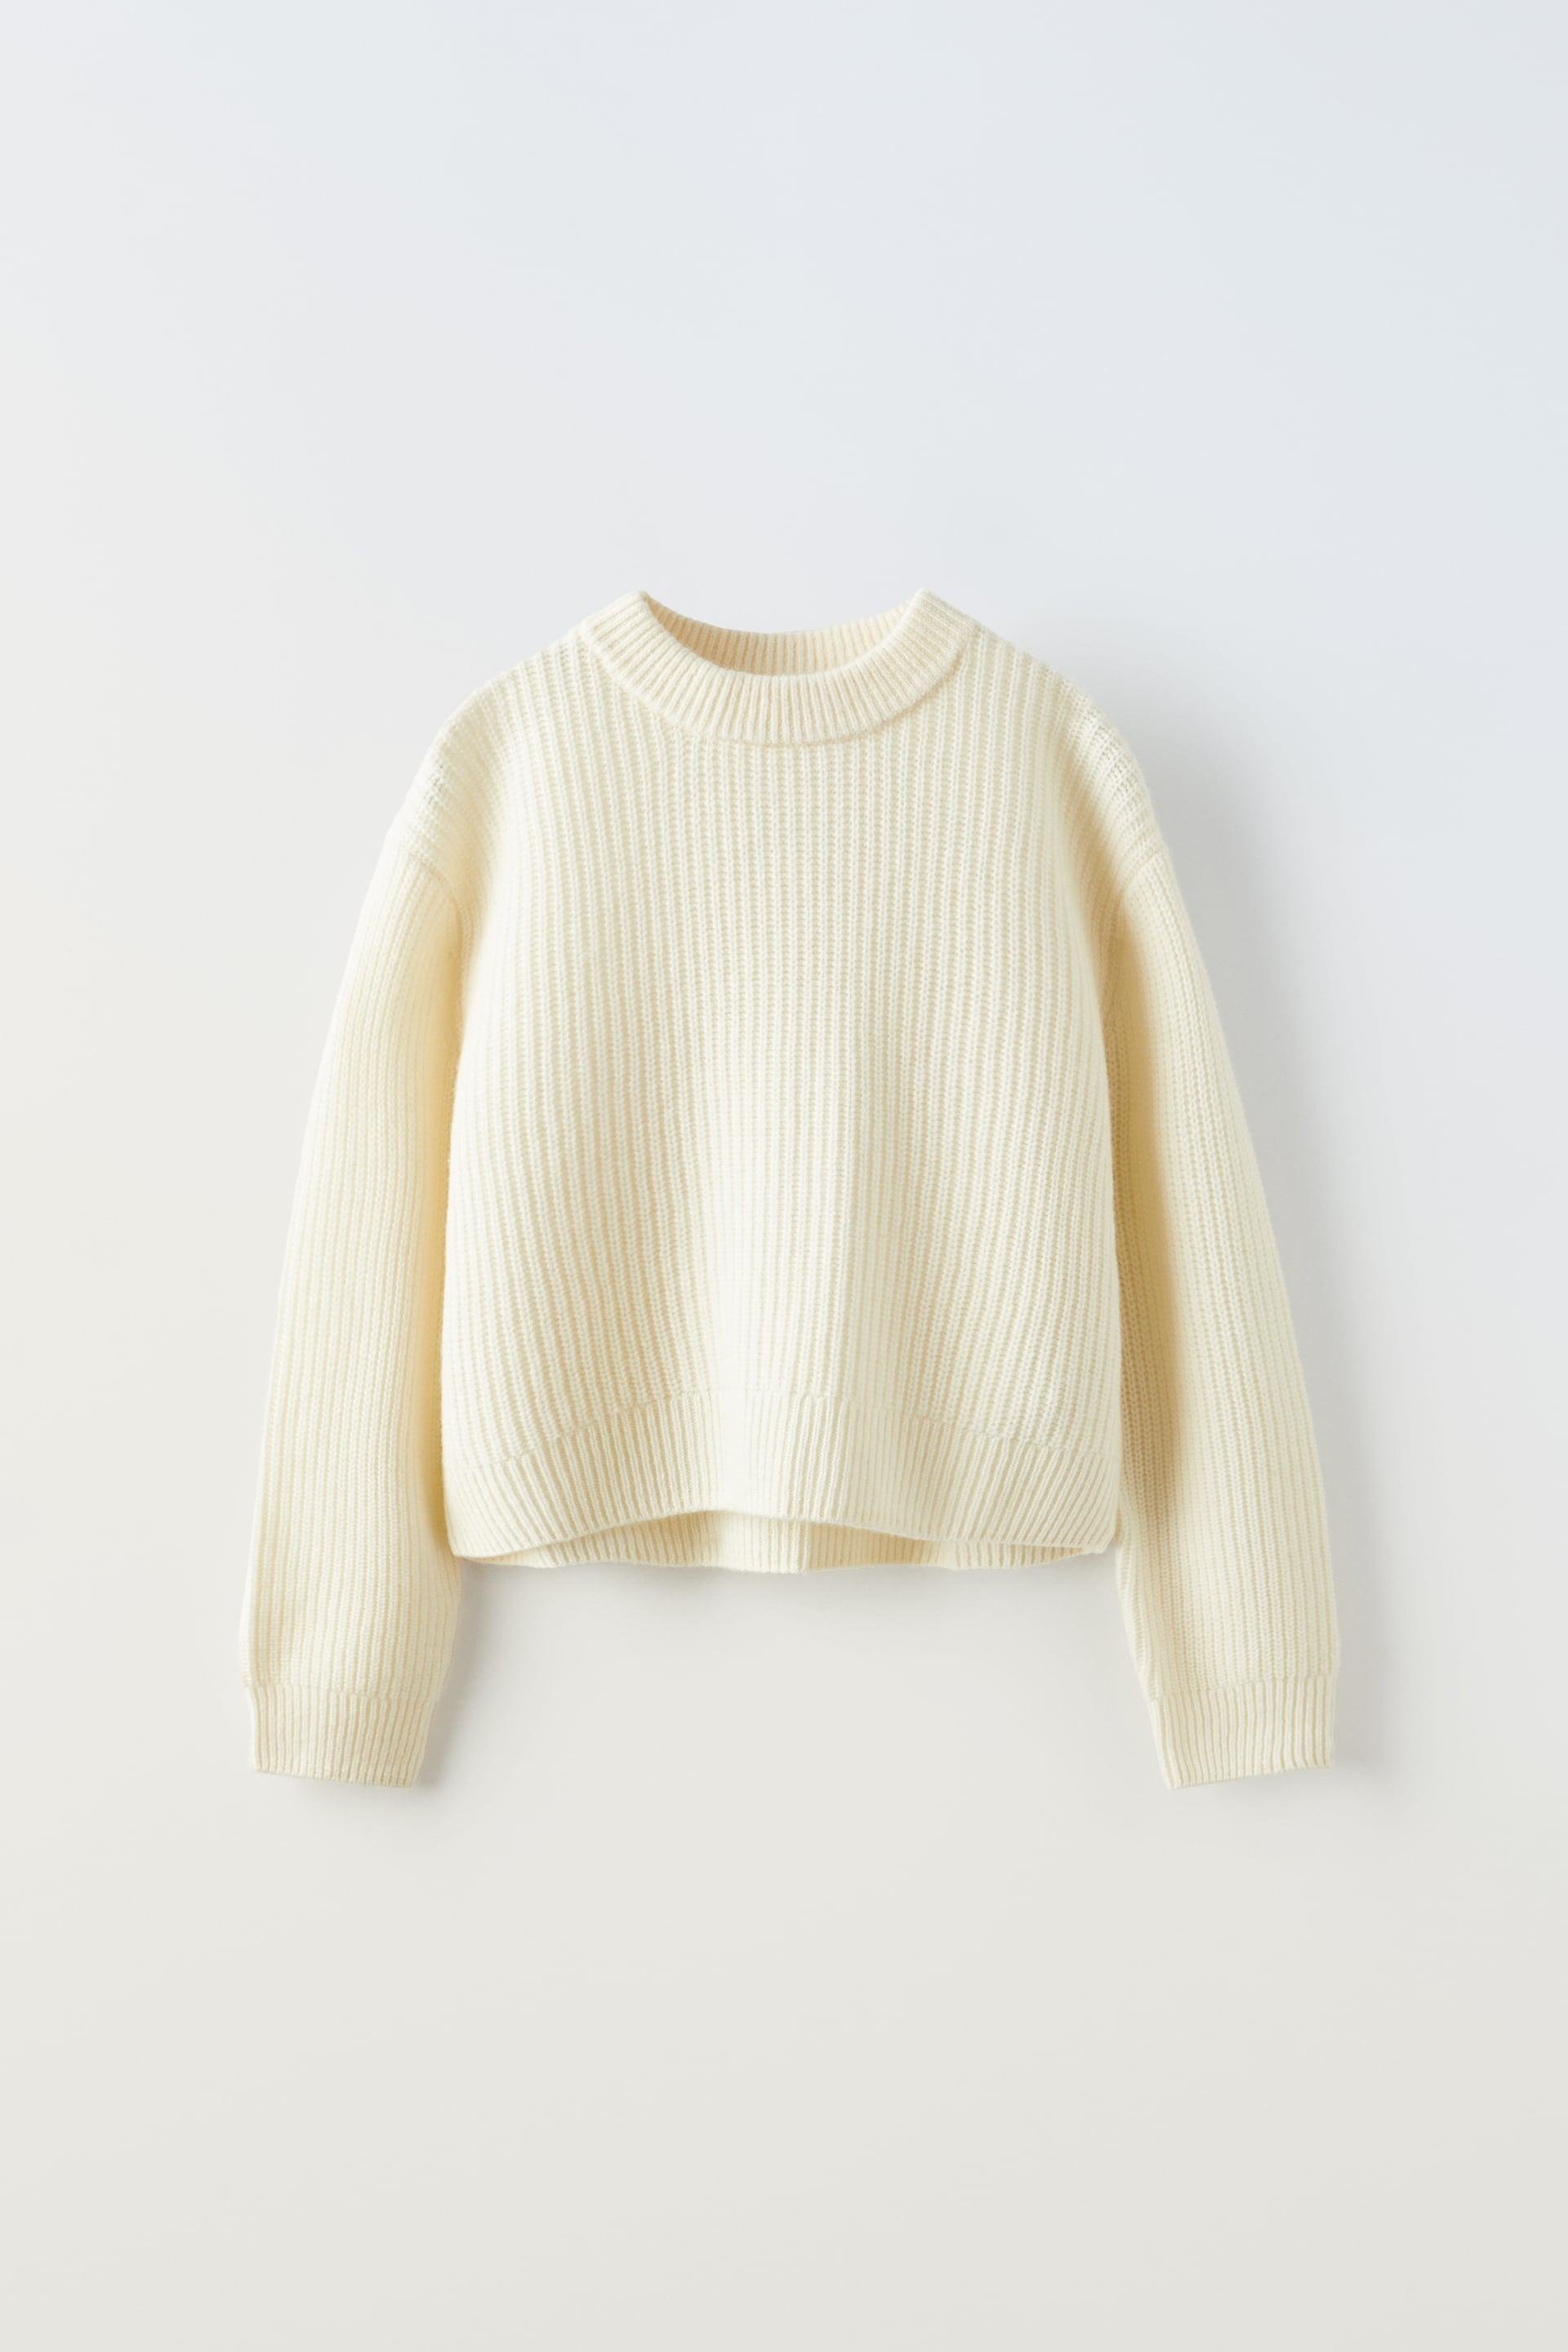 100% WOOL KNIT SWEATER LIMITED EDITION by ZARA